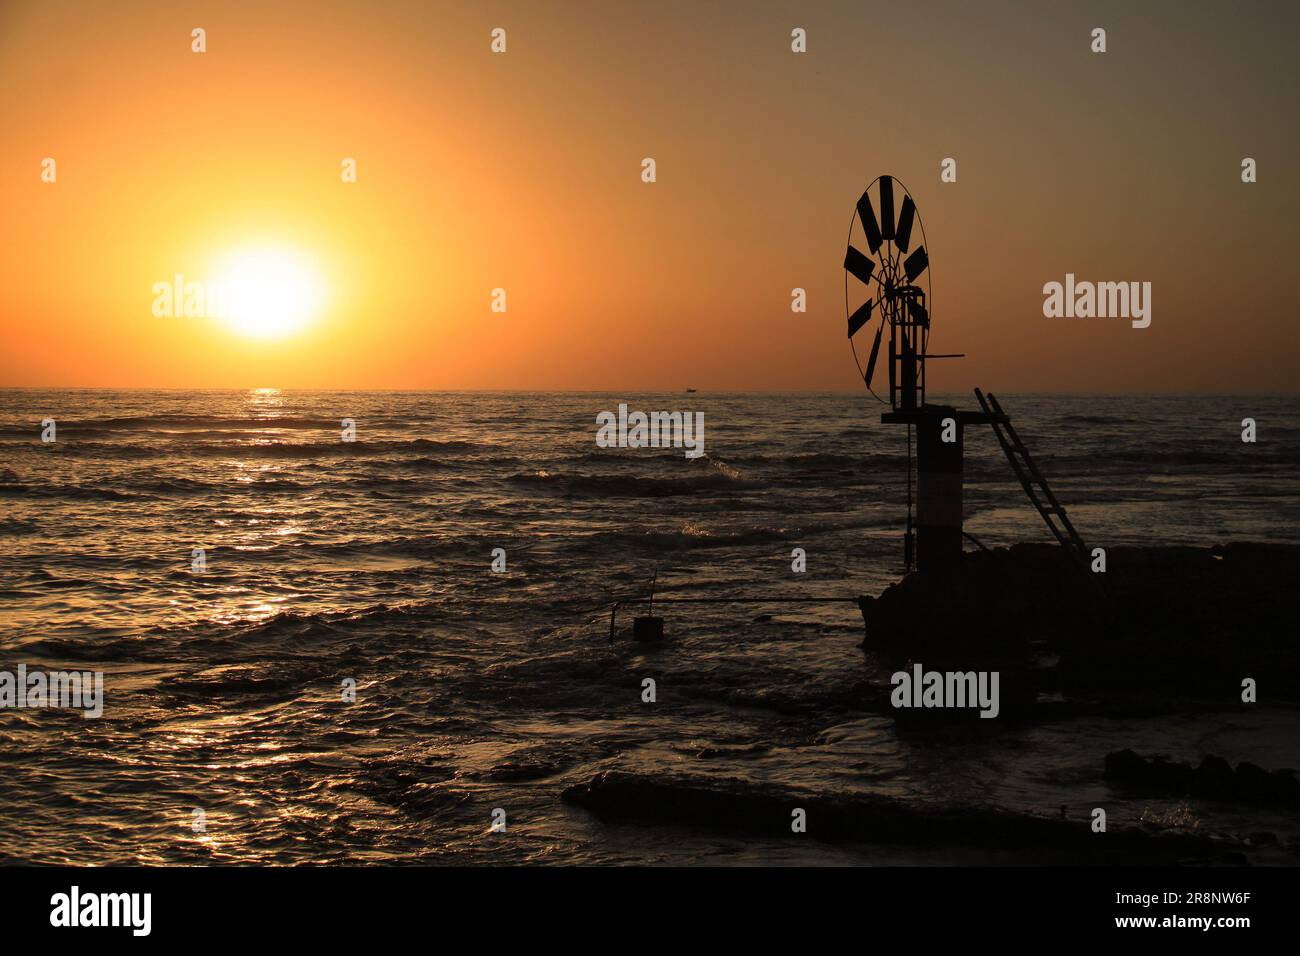 Windmill for extracting sea water for saltmarshes in the coastal city of Anfeh, Lebanon. Stock Photo